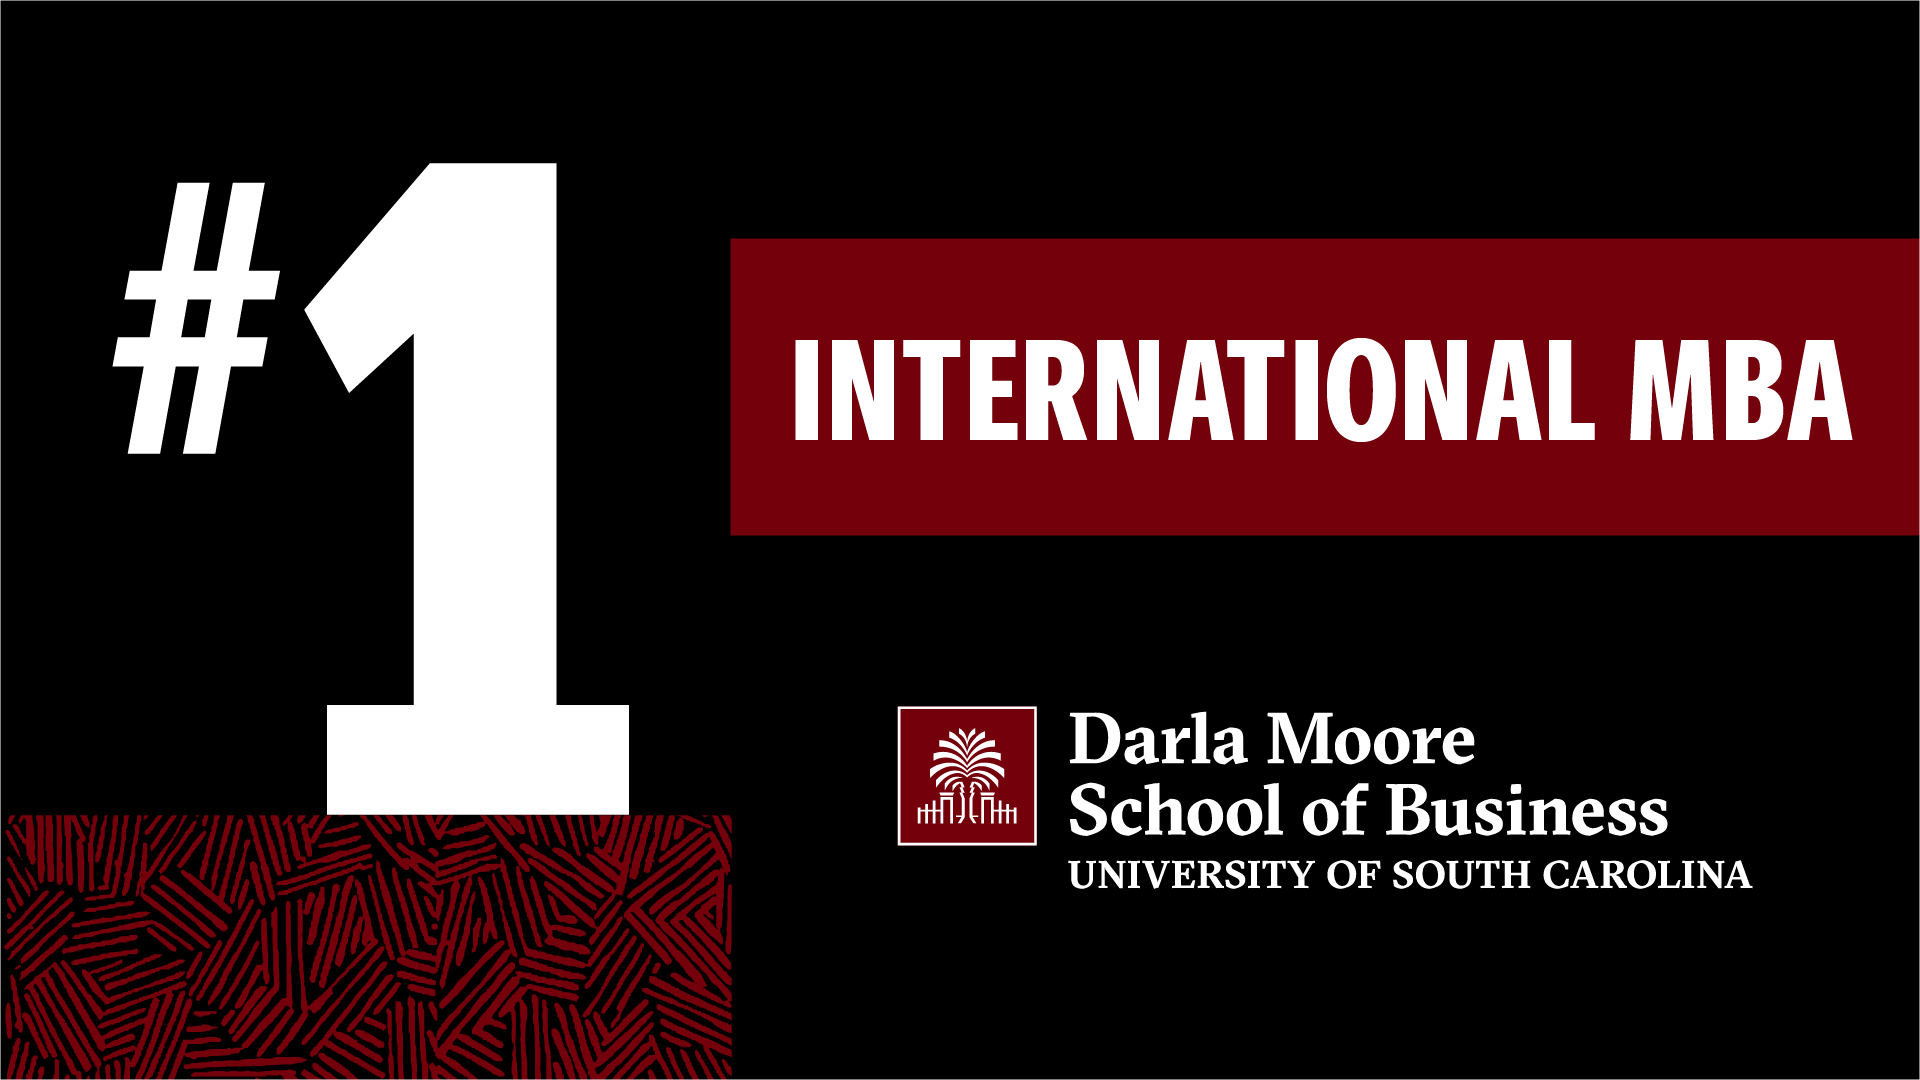 The International MBA Program has been ranked no.1 for the 11th consecutive year by U.S. News and World Report. The IMBA has been ranked in the top 3 for 35 consecutive years.